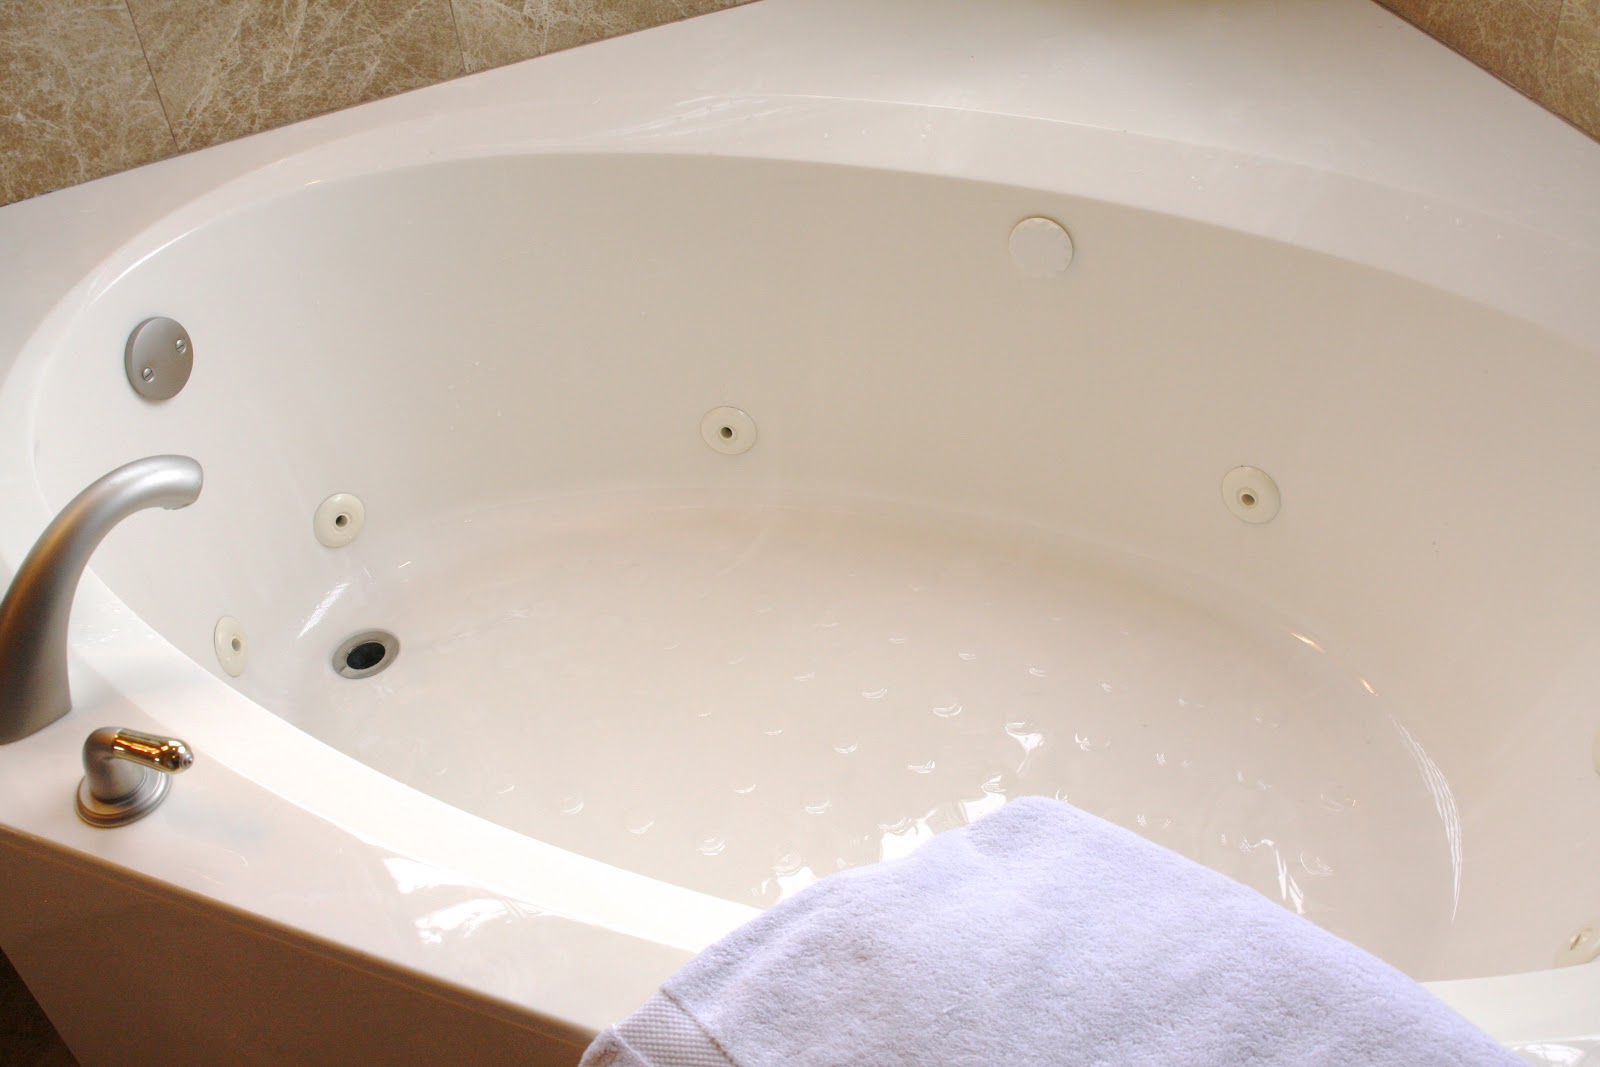 How To Clean Whirlpool Tub Jets, How To Clean Spa Bathtub Jets